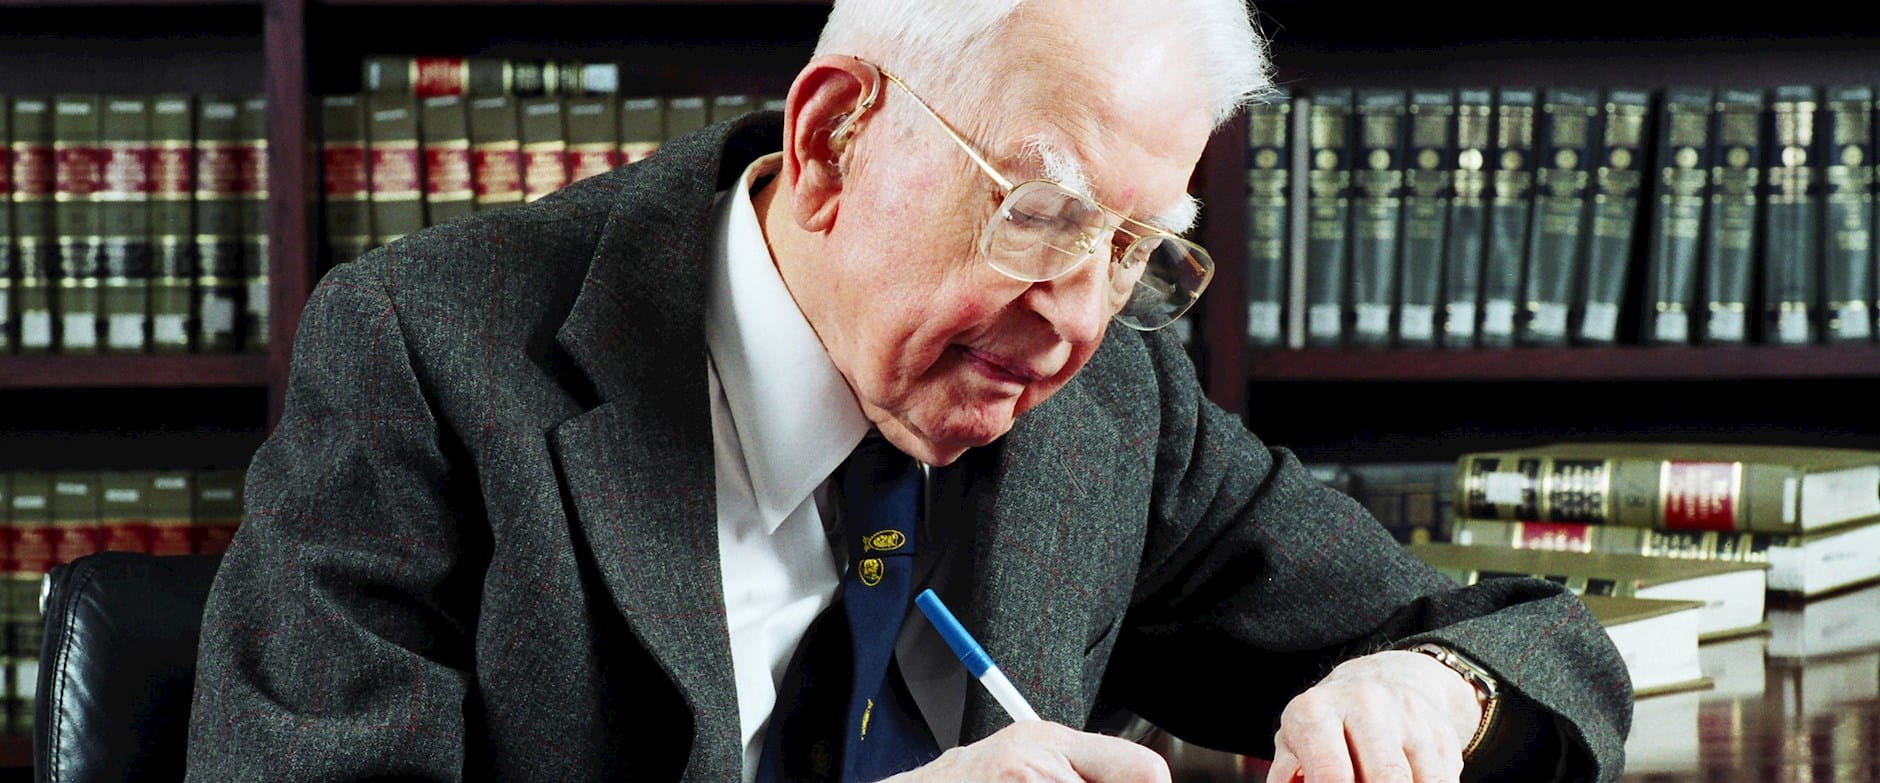 Ronald Coase writing in his office